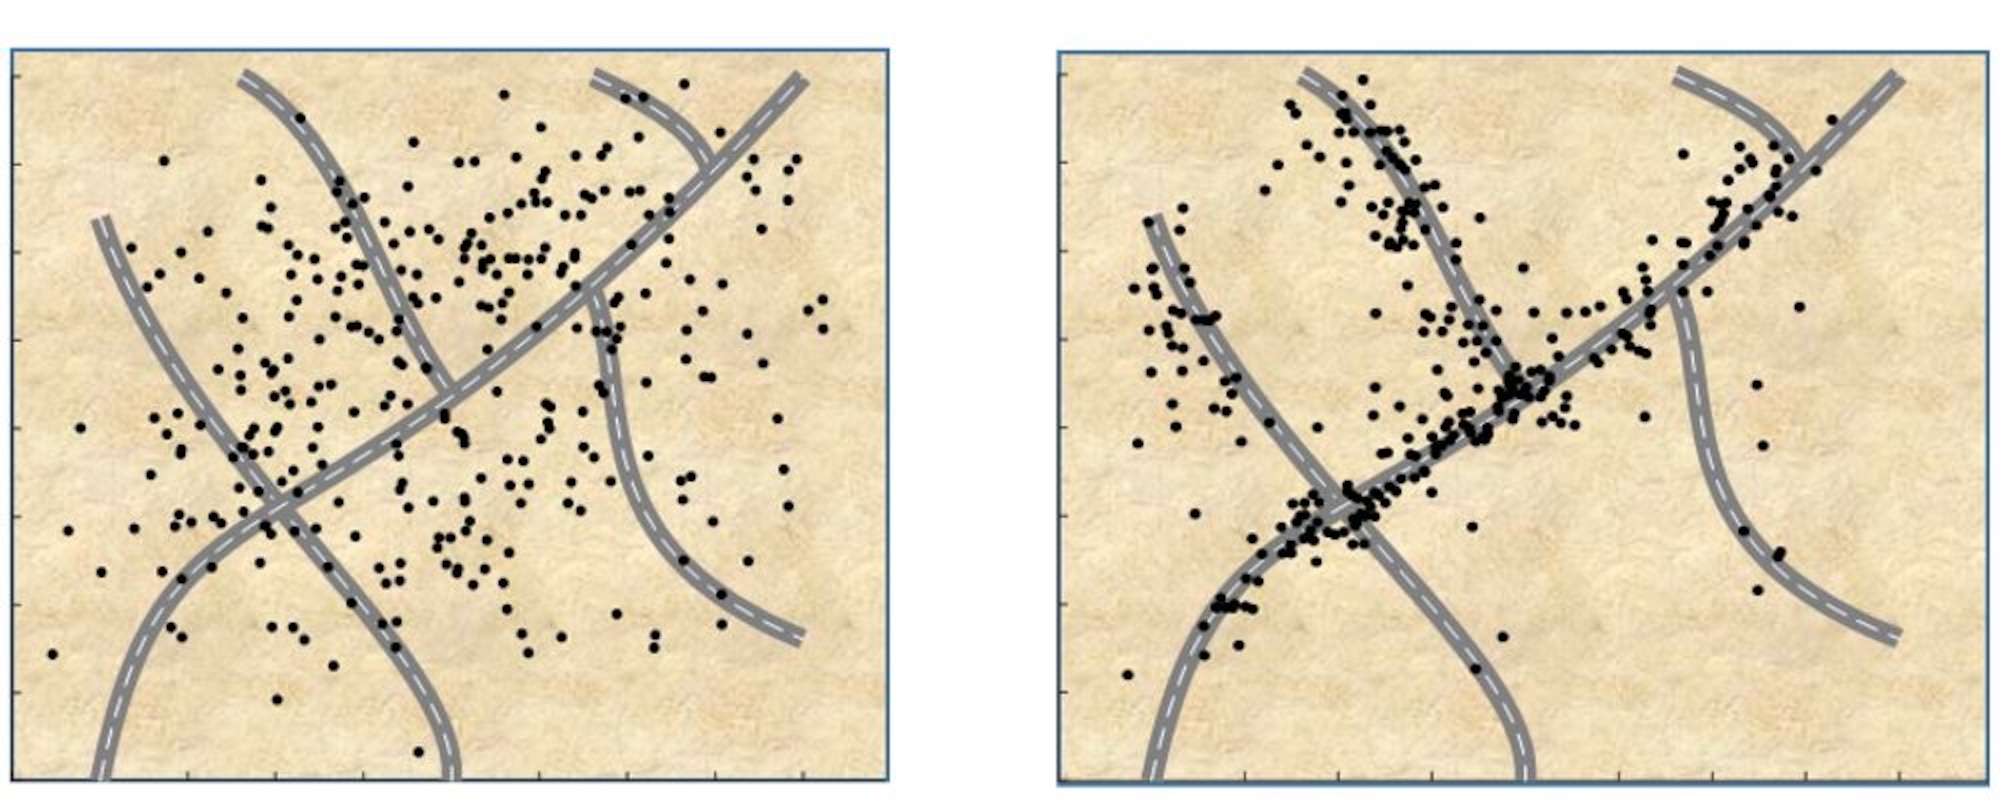 Simulation results illustrating the ability of the approach to cluster packages near a road network. In the figure on the left, all packages transitioned from drogue to main parachute at the same altitude. In the figure on the right, the transition altitude for each package was selected so that the wind field shaped the flight path so that each package landed as close as possible to a road. (Courtesy illustration)